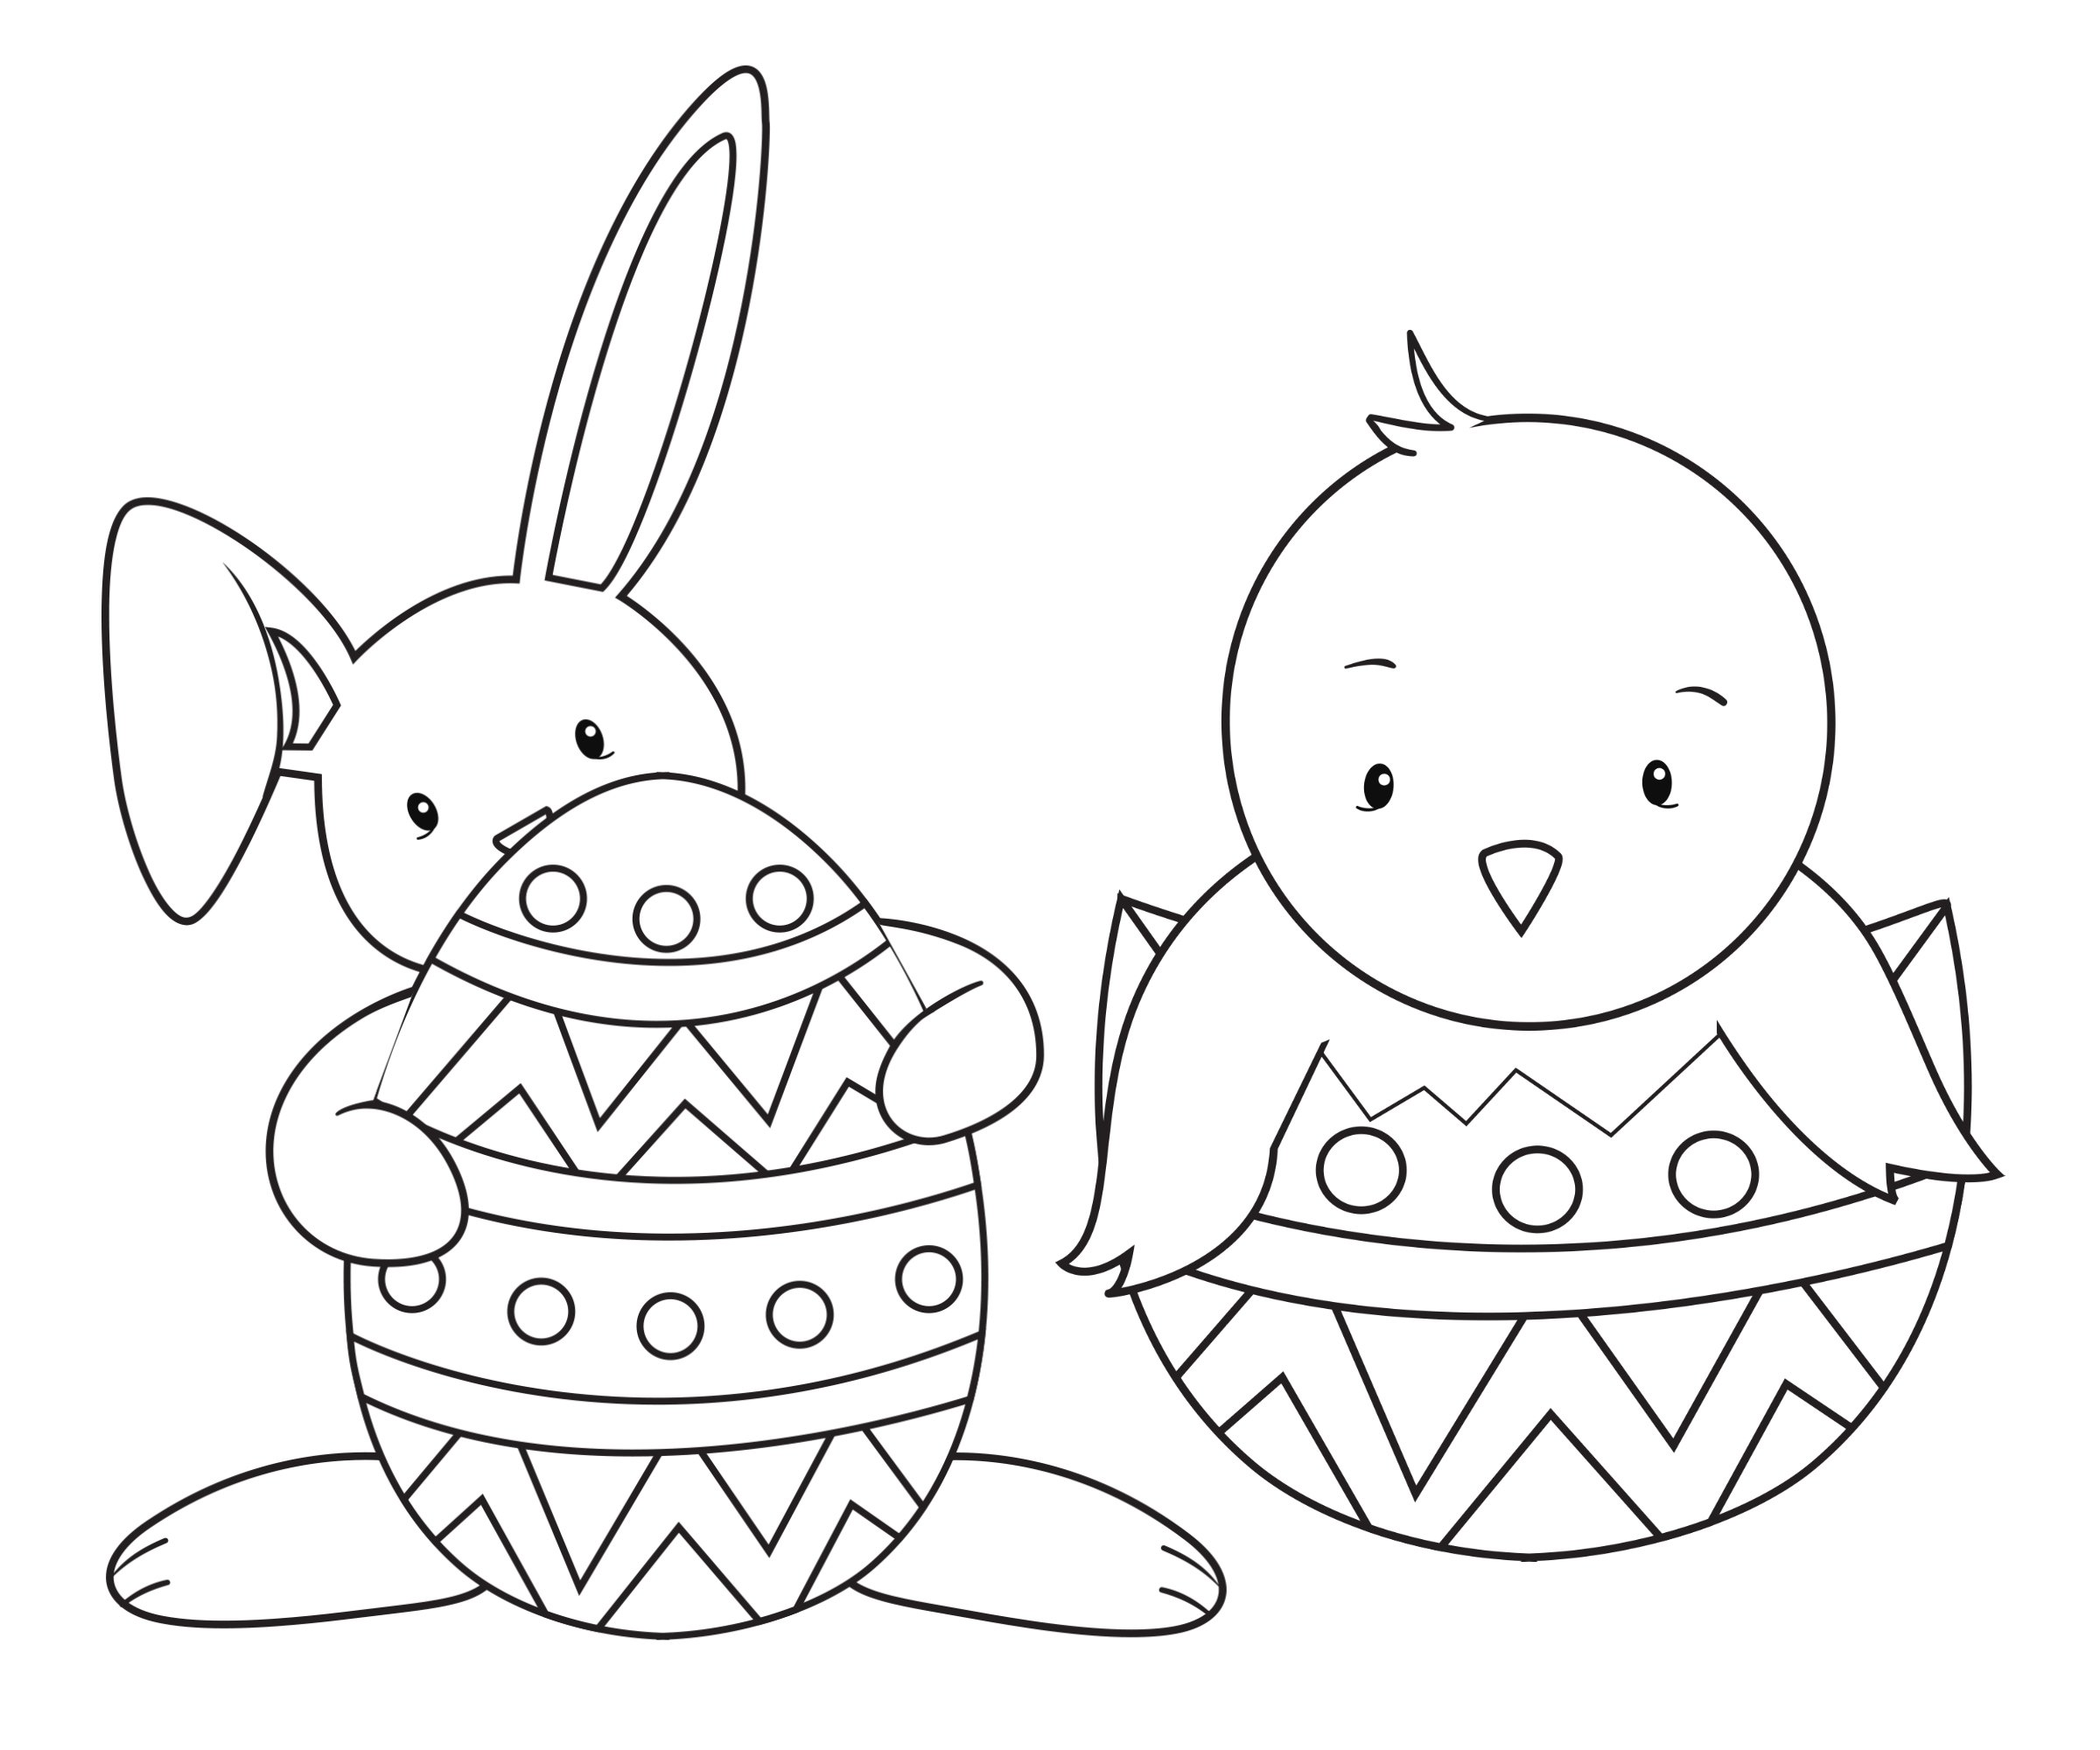 Colouring Pictures Of Easter Bunnies 78